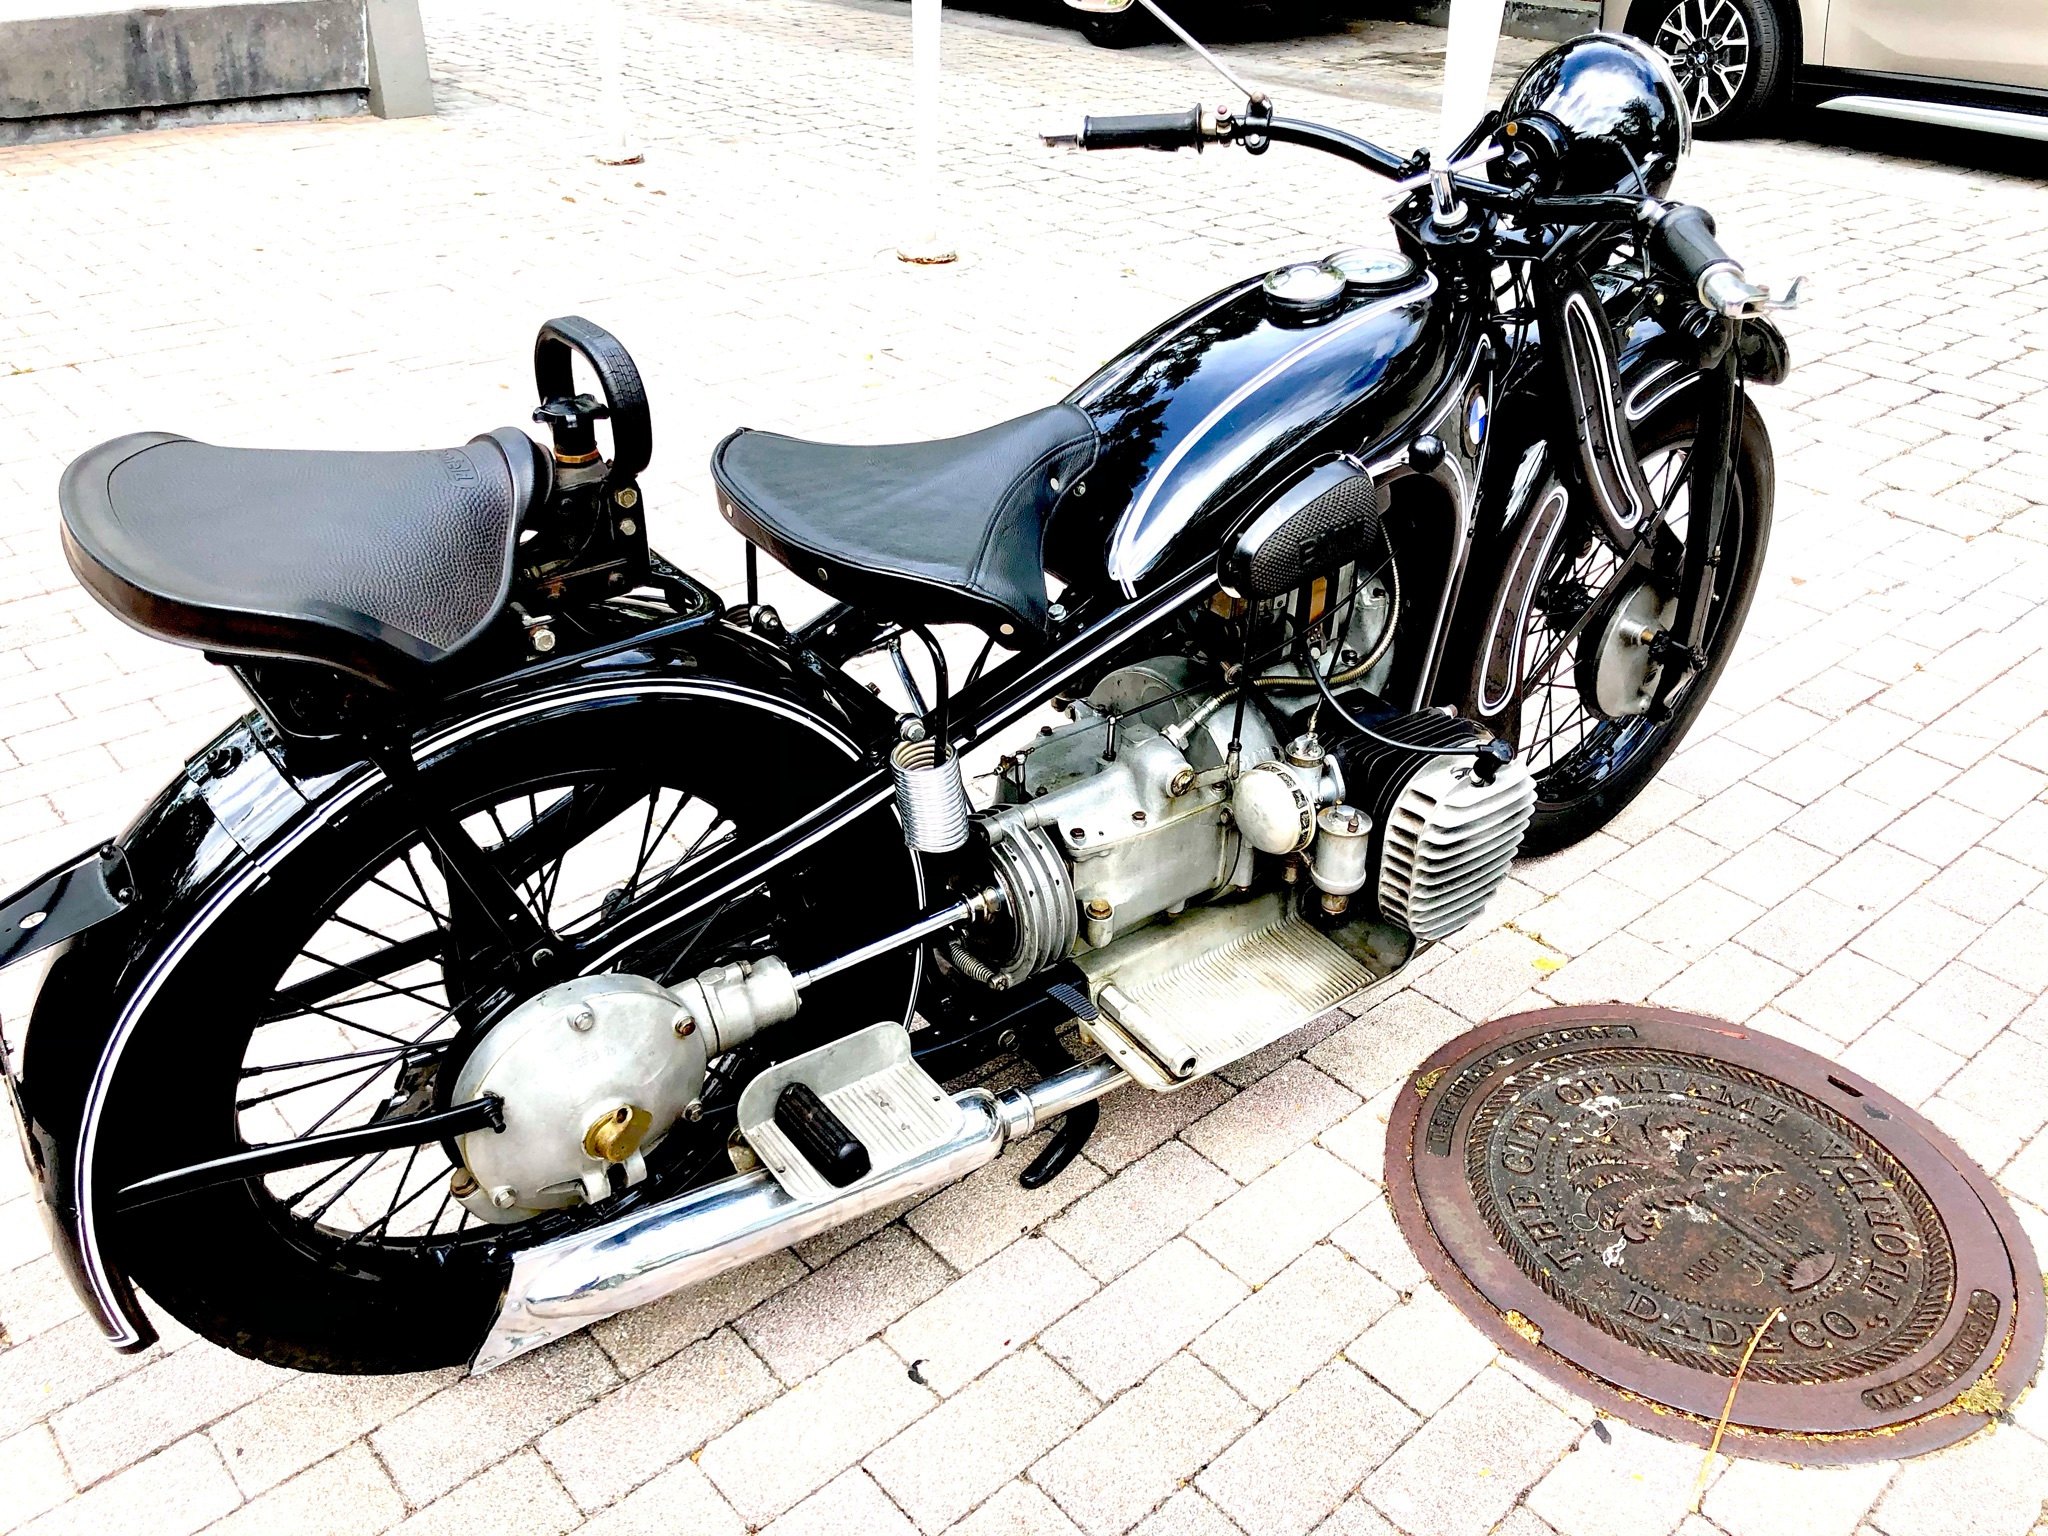 1934 BMW R11 Series 5 is on auction-2